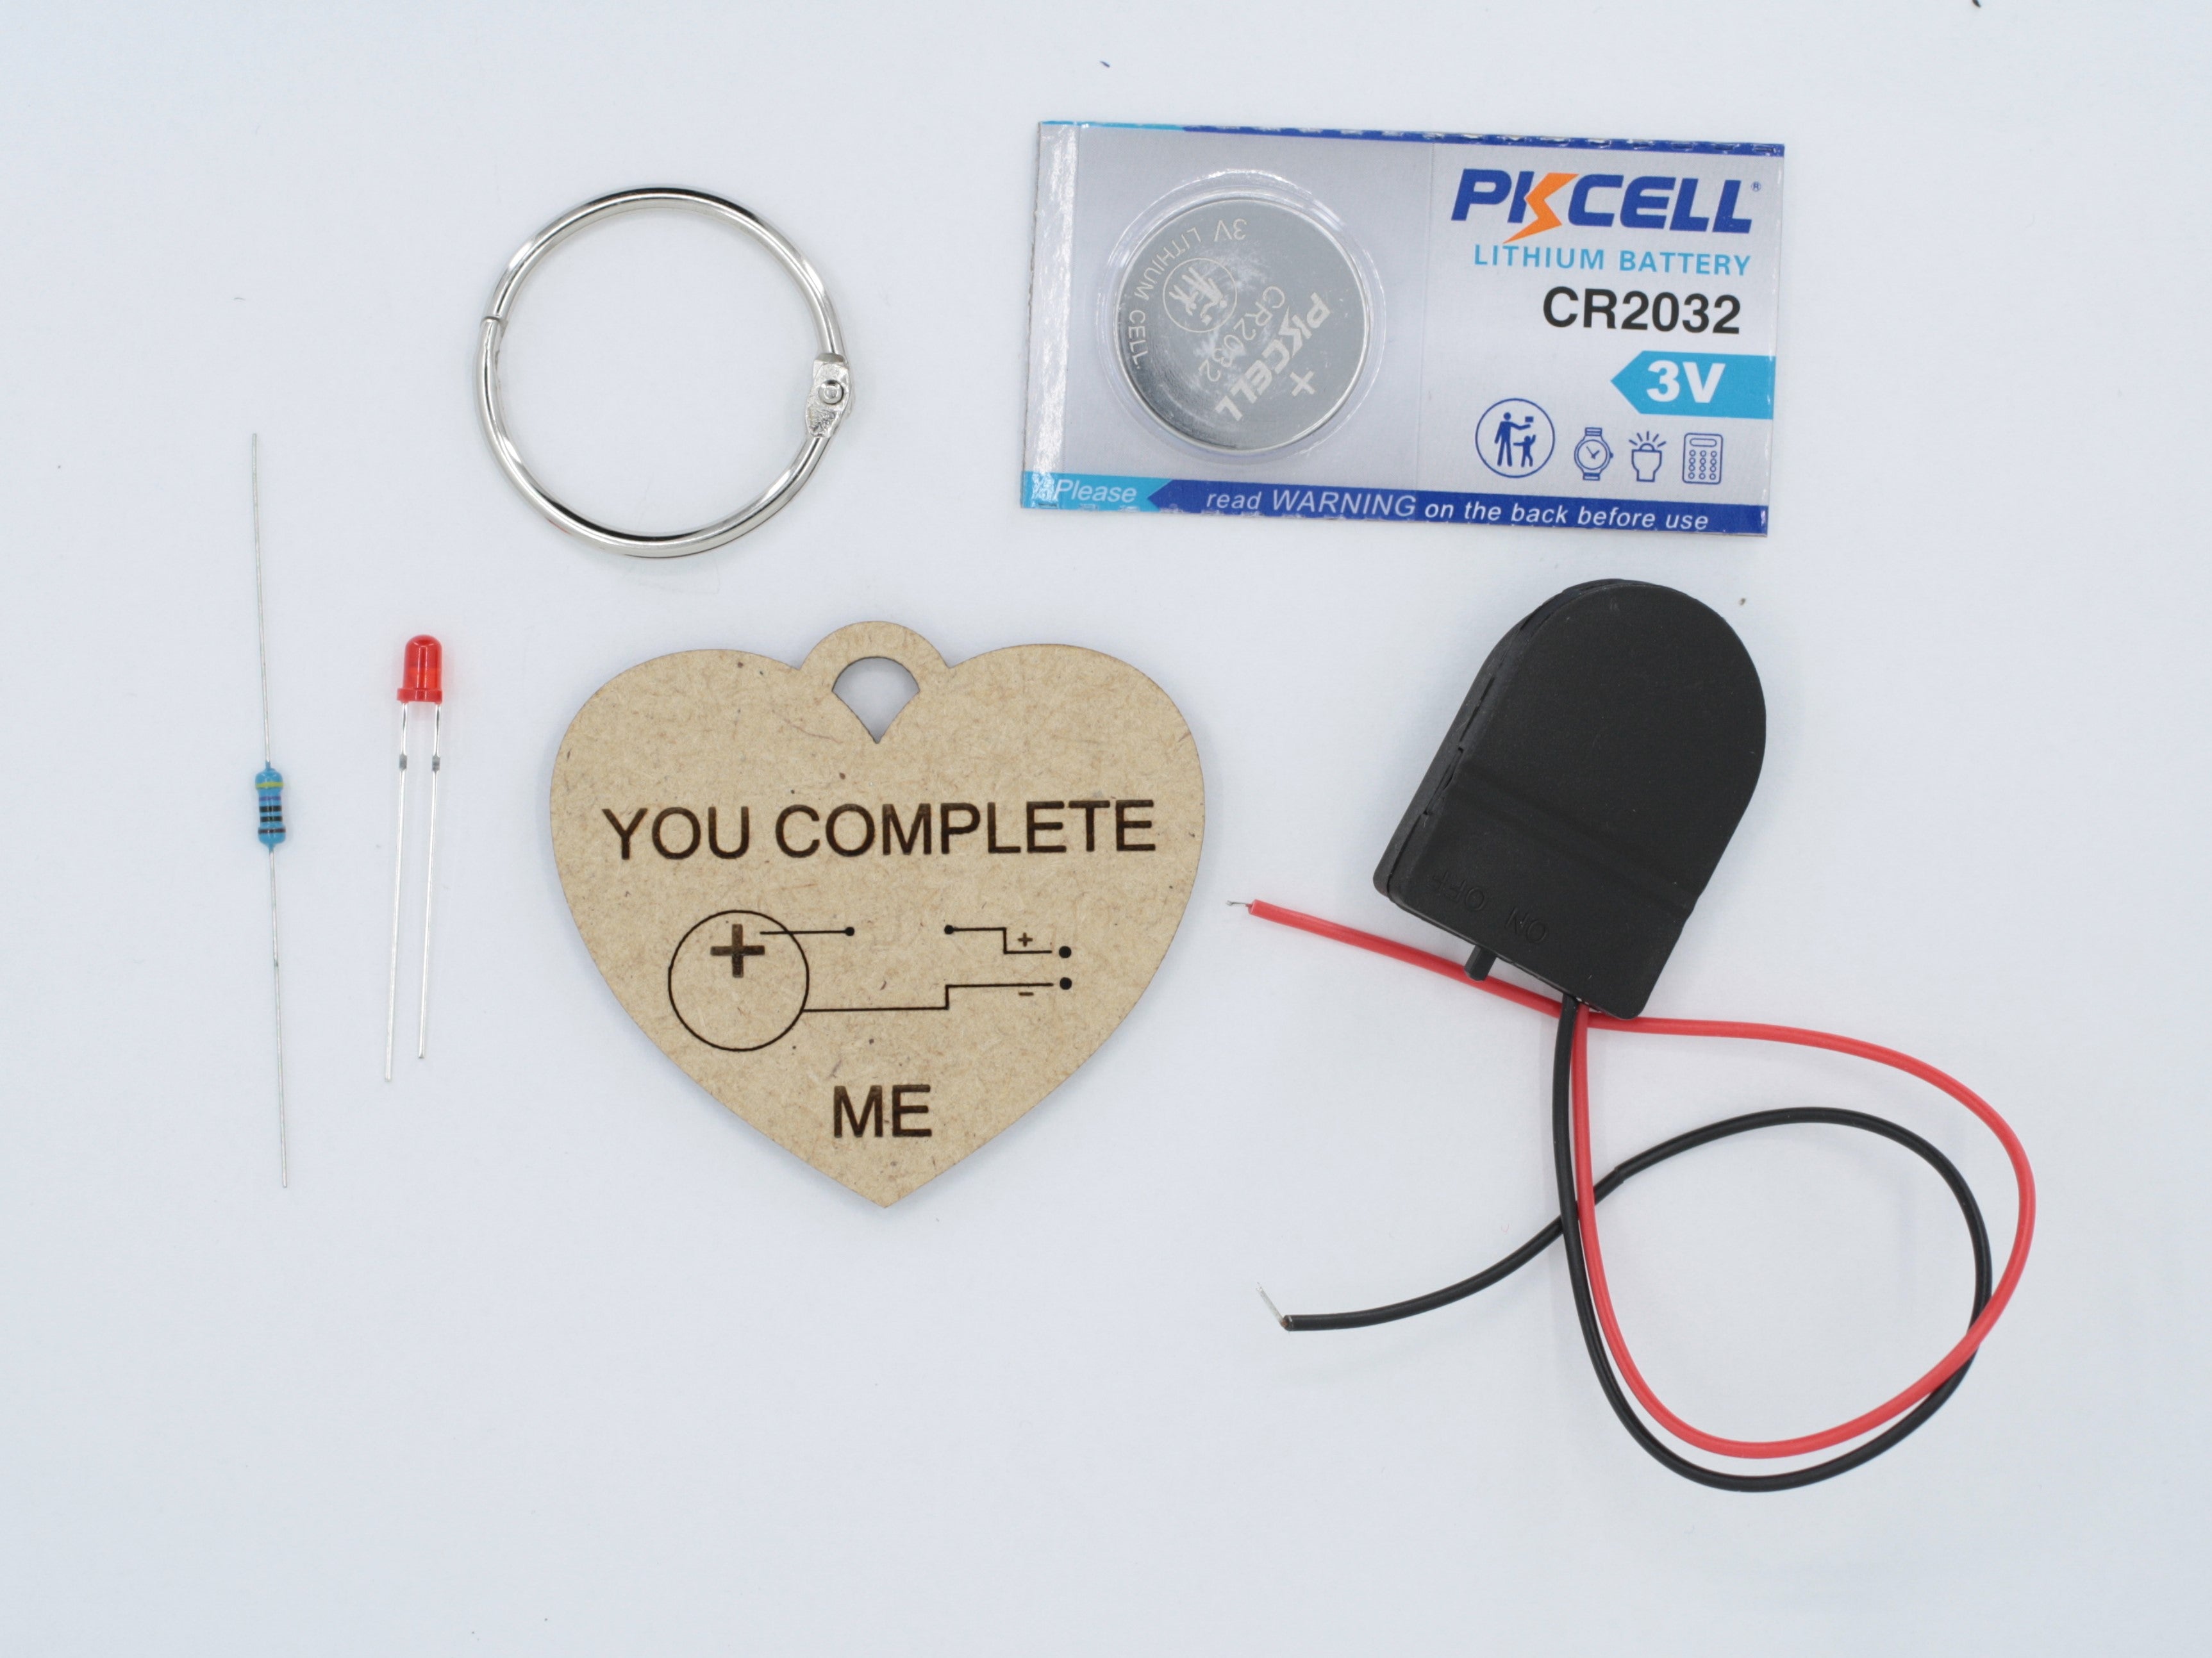 Circuit Candy Hearts